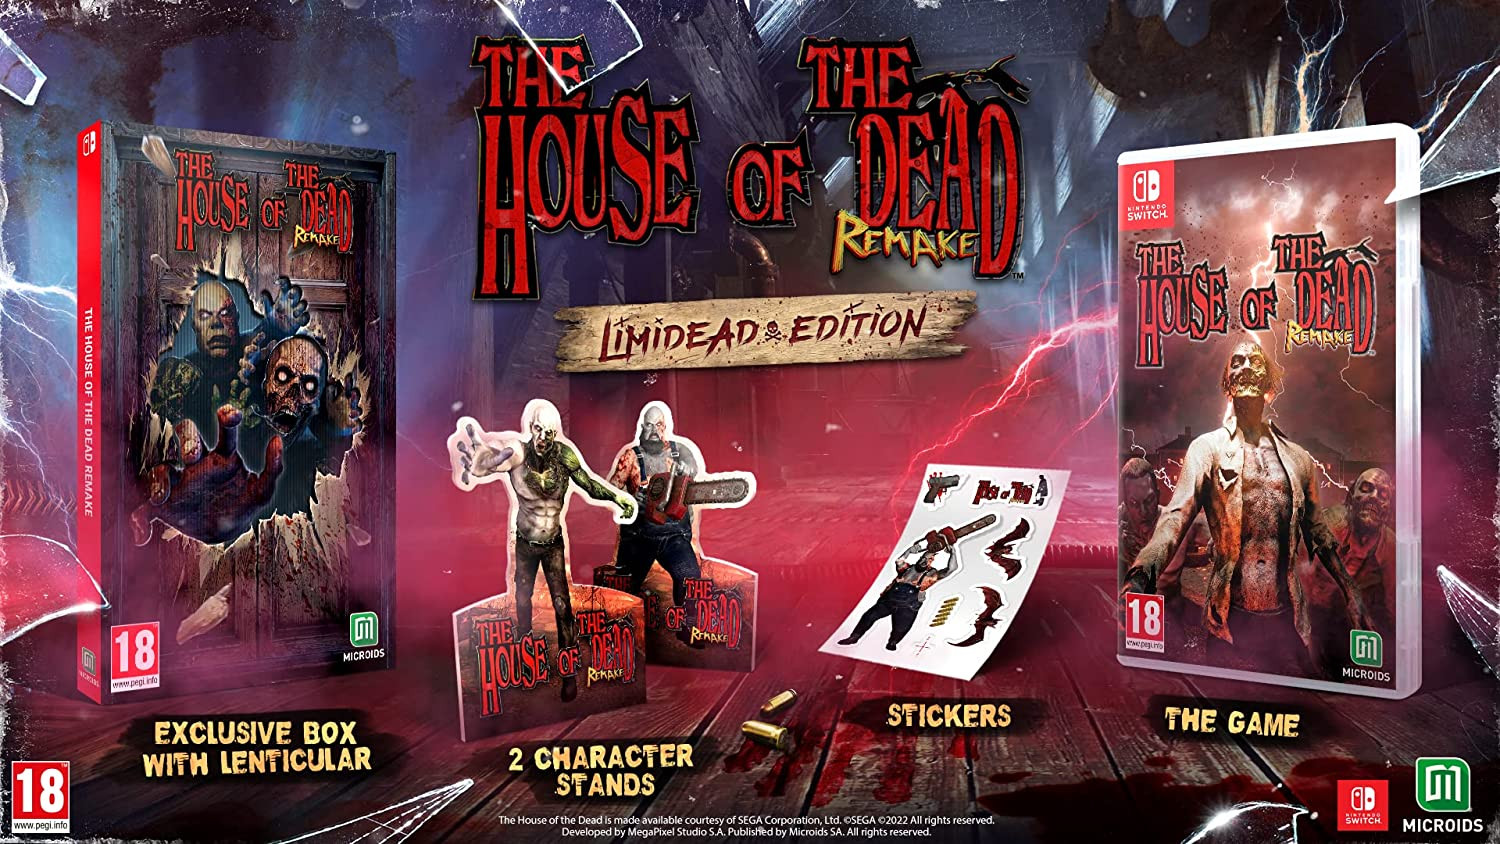 The House of the Dead Remake: Limidead Edition - Nintendo Switch